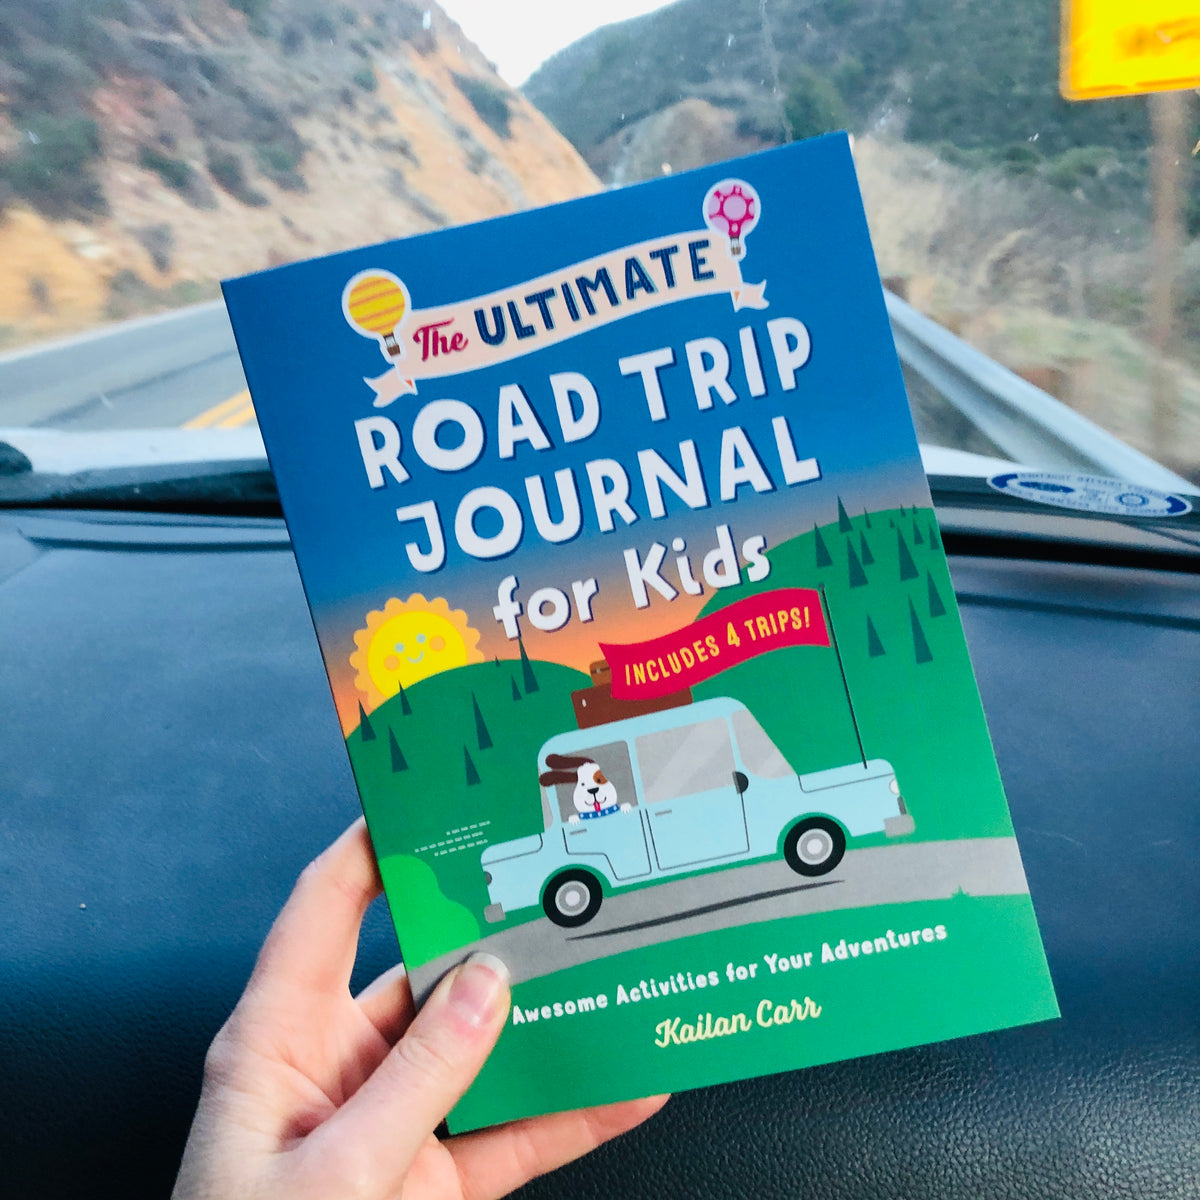 The Ultimate Road Trip Journal for Kids